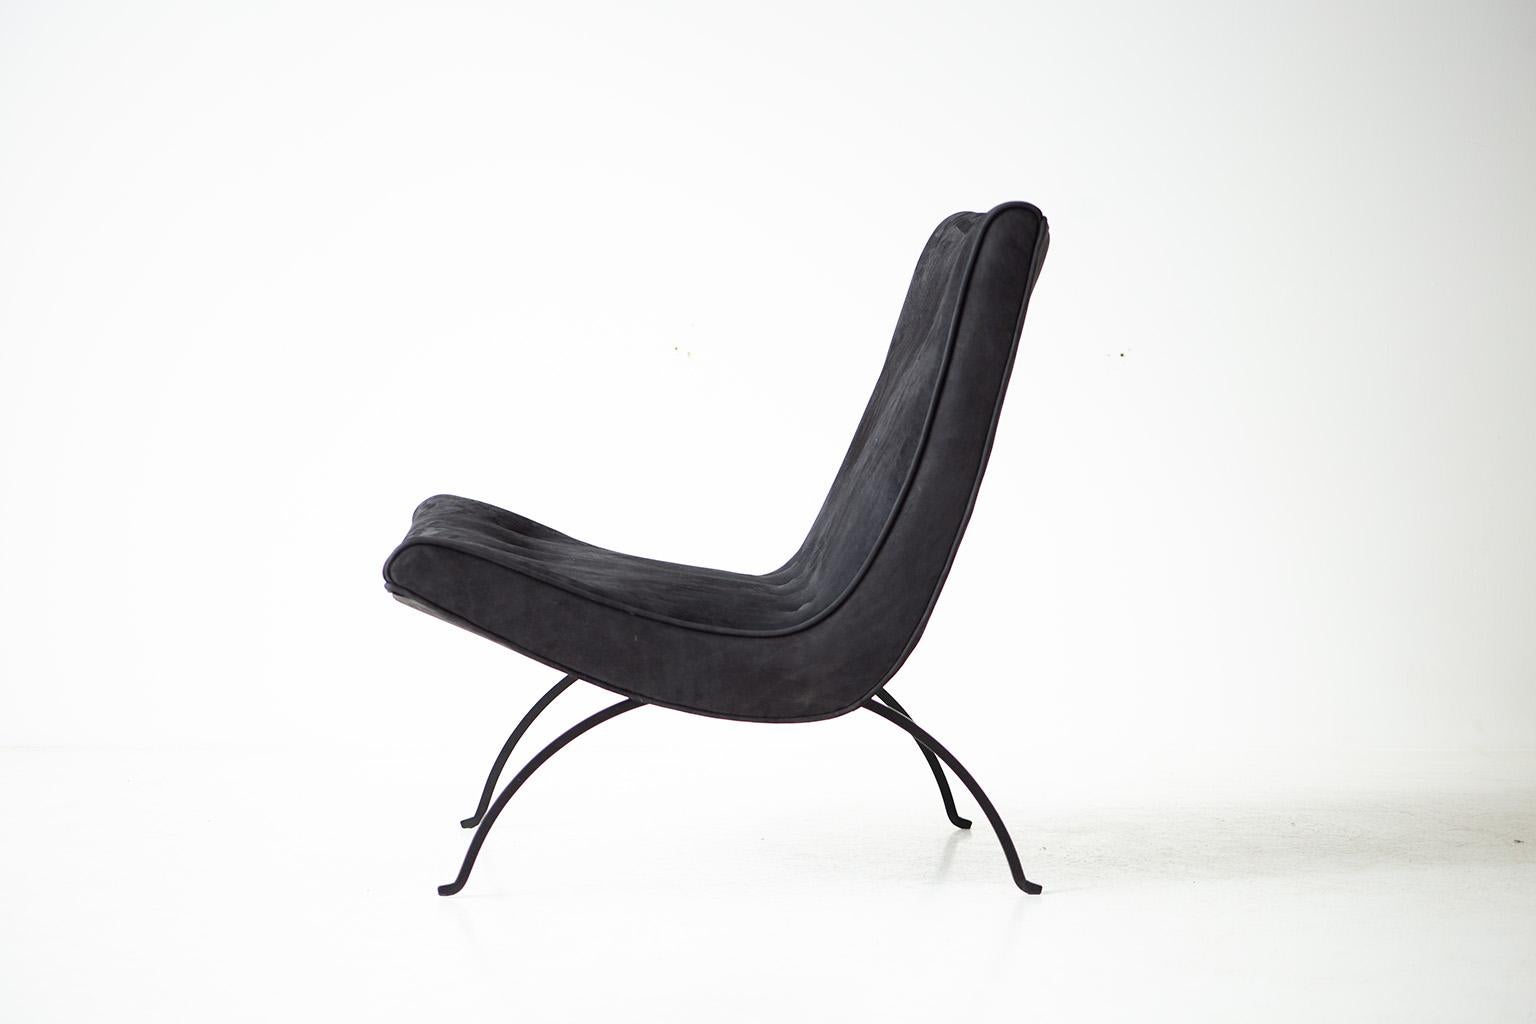 Designer: Milo Baughman

Manufacturer: Thayer Coggin
Period and Model: Mid-Century Modern
Specs: Metal, High-Grade Leather

Condition

This Milo Baughman leather scoop lounge chair for Thayer Coggin is in excellent restored condition. The